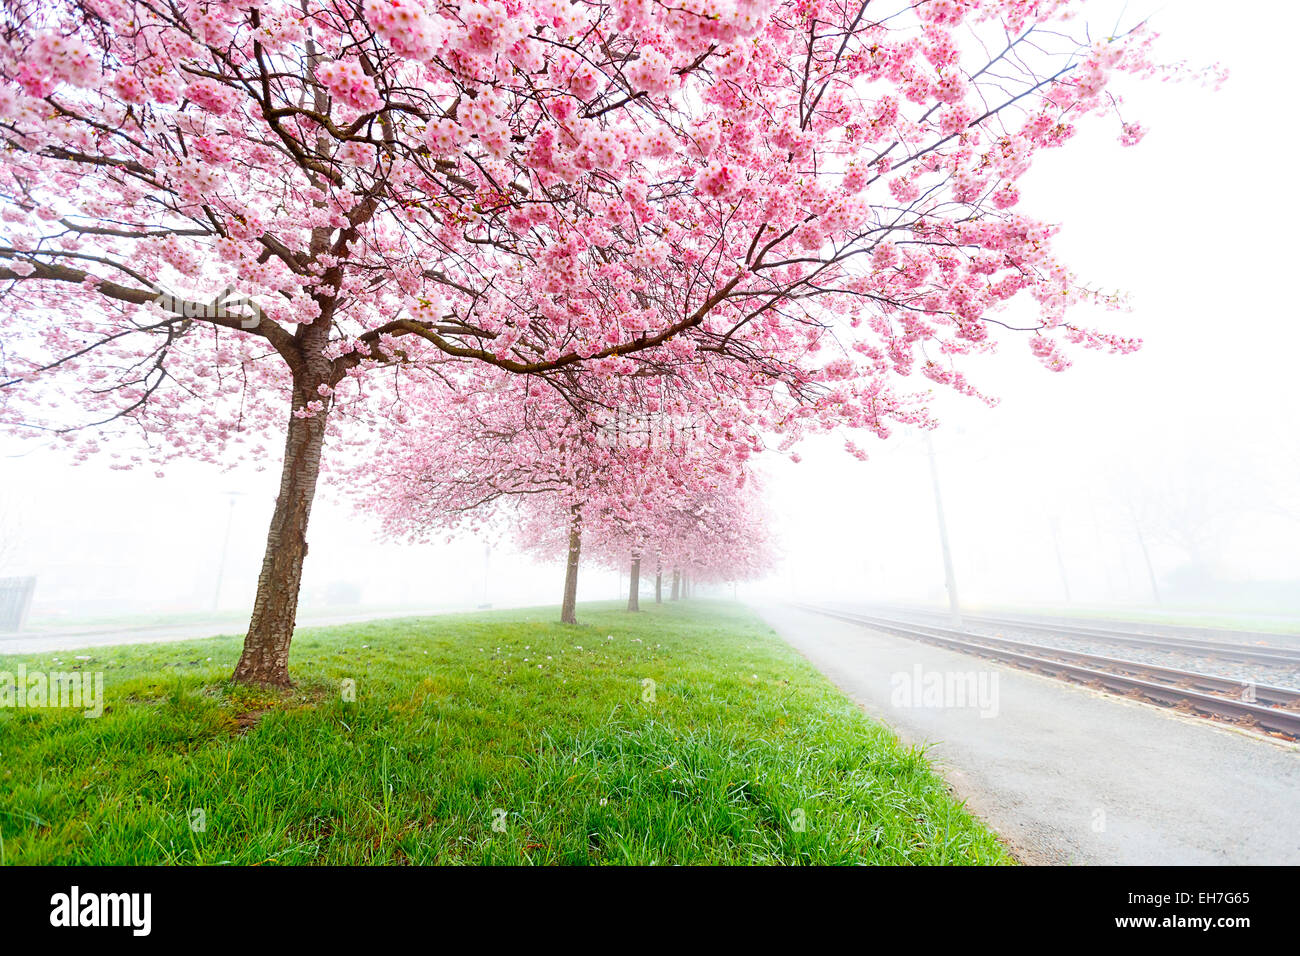 Pink blossom on trees Stock Photo